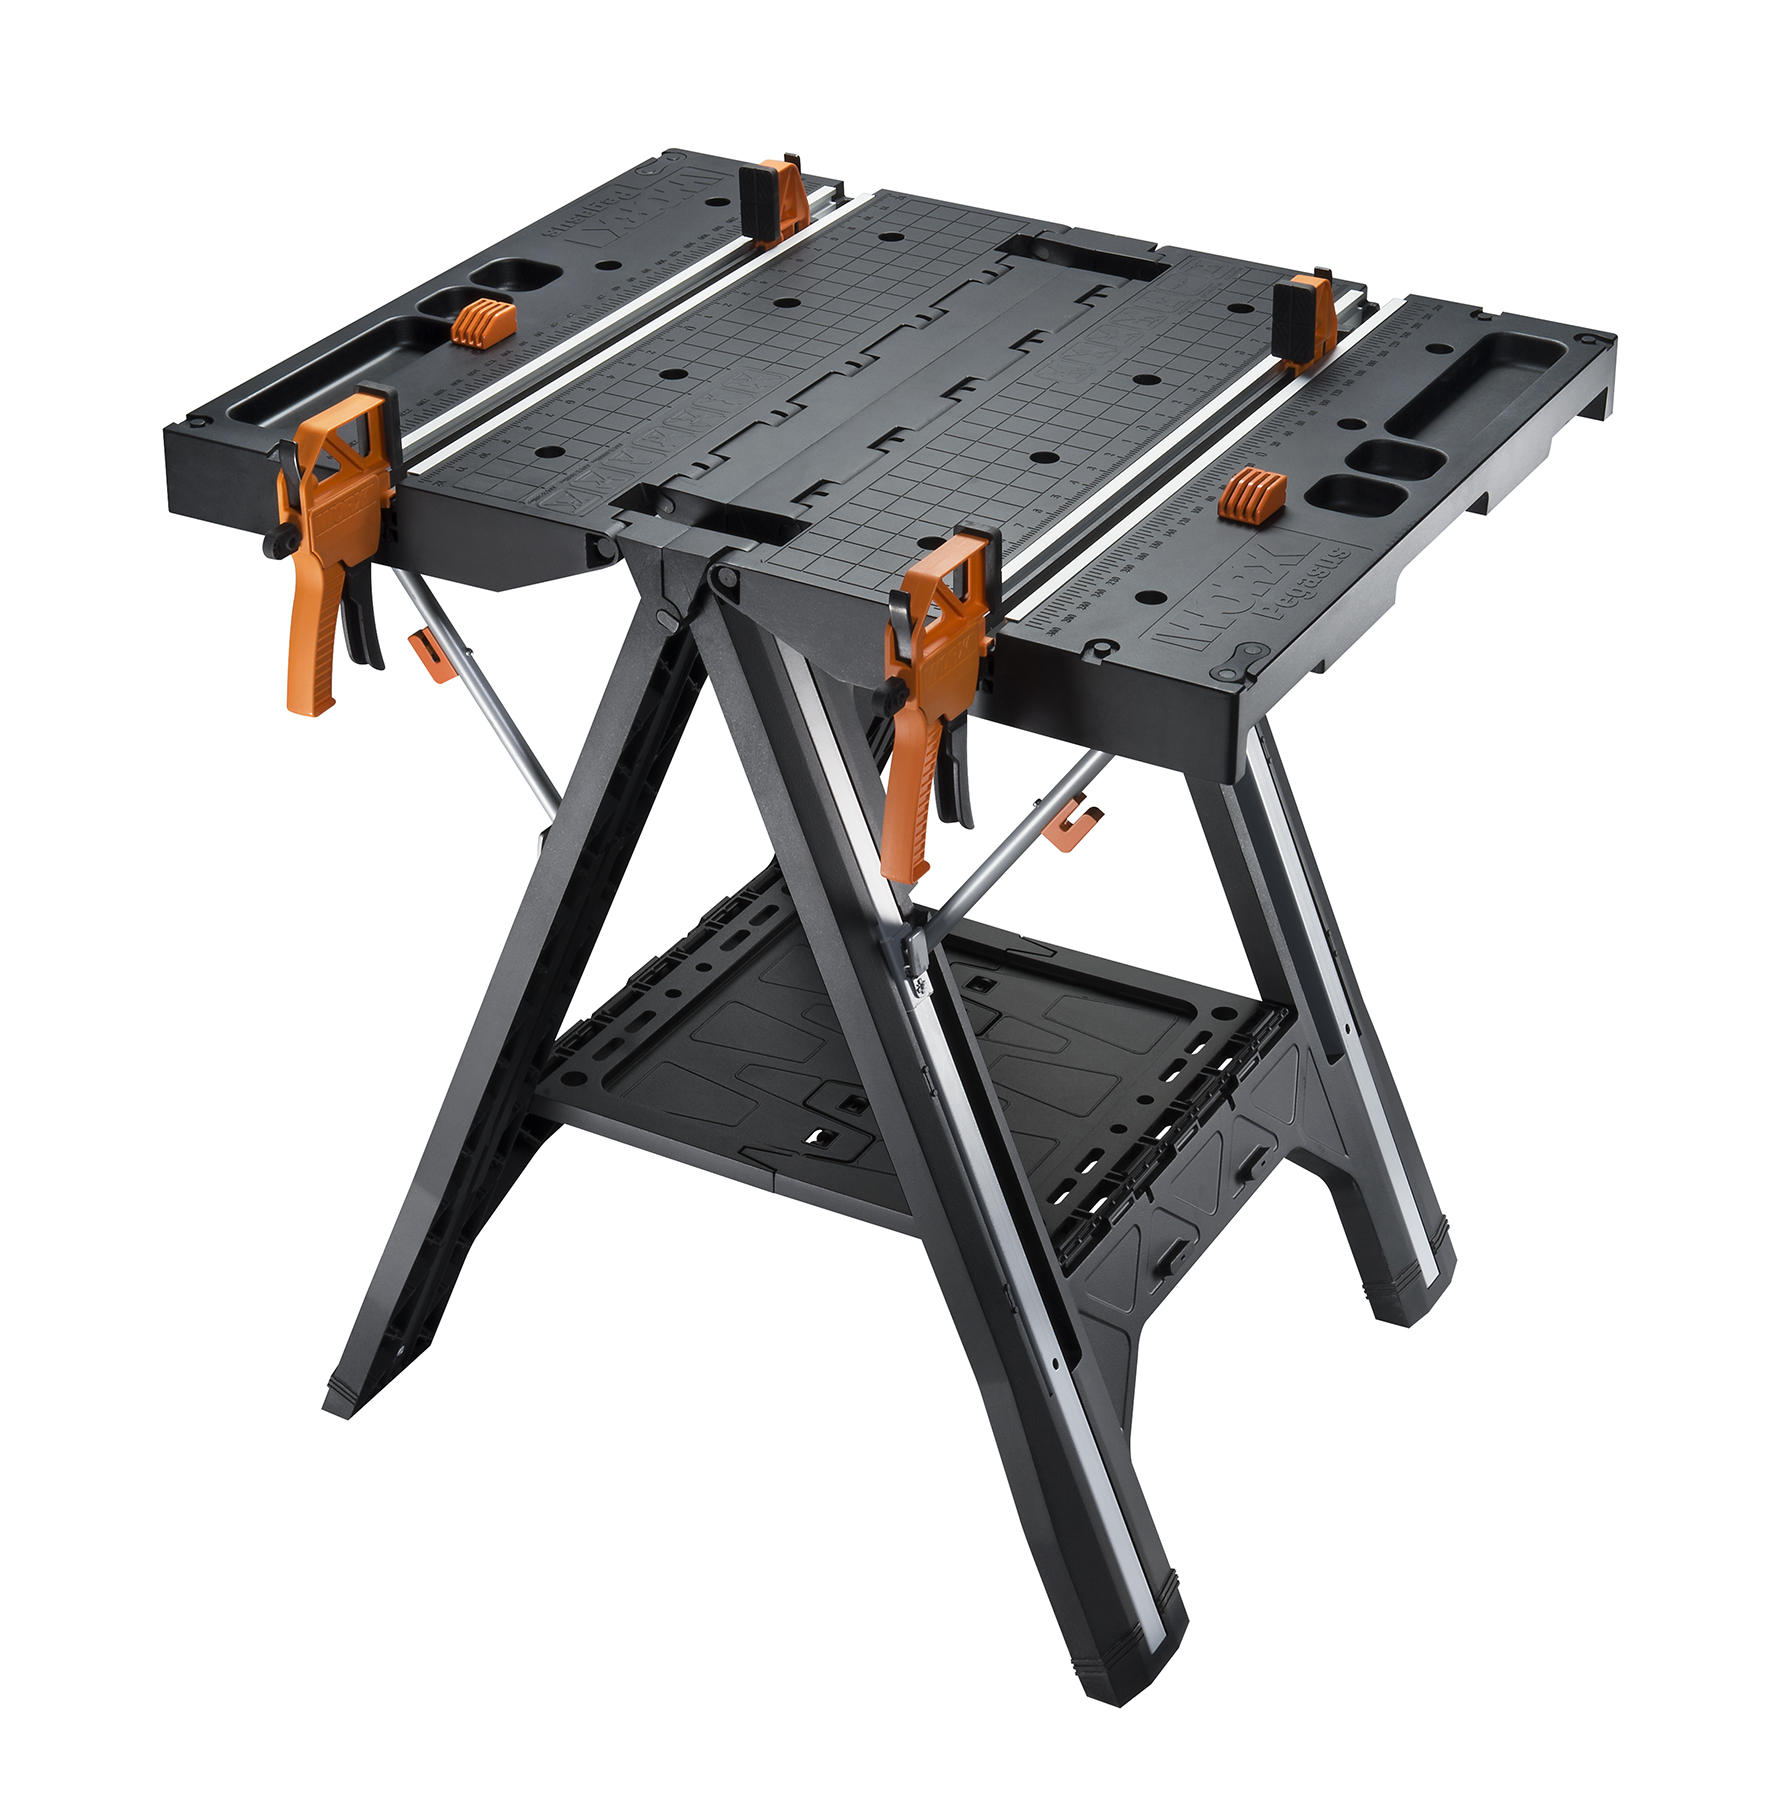 WORX Pegasus Folding Worktable and Sawhorse is the ideal work station.